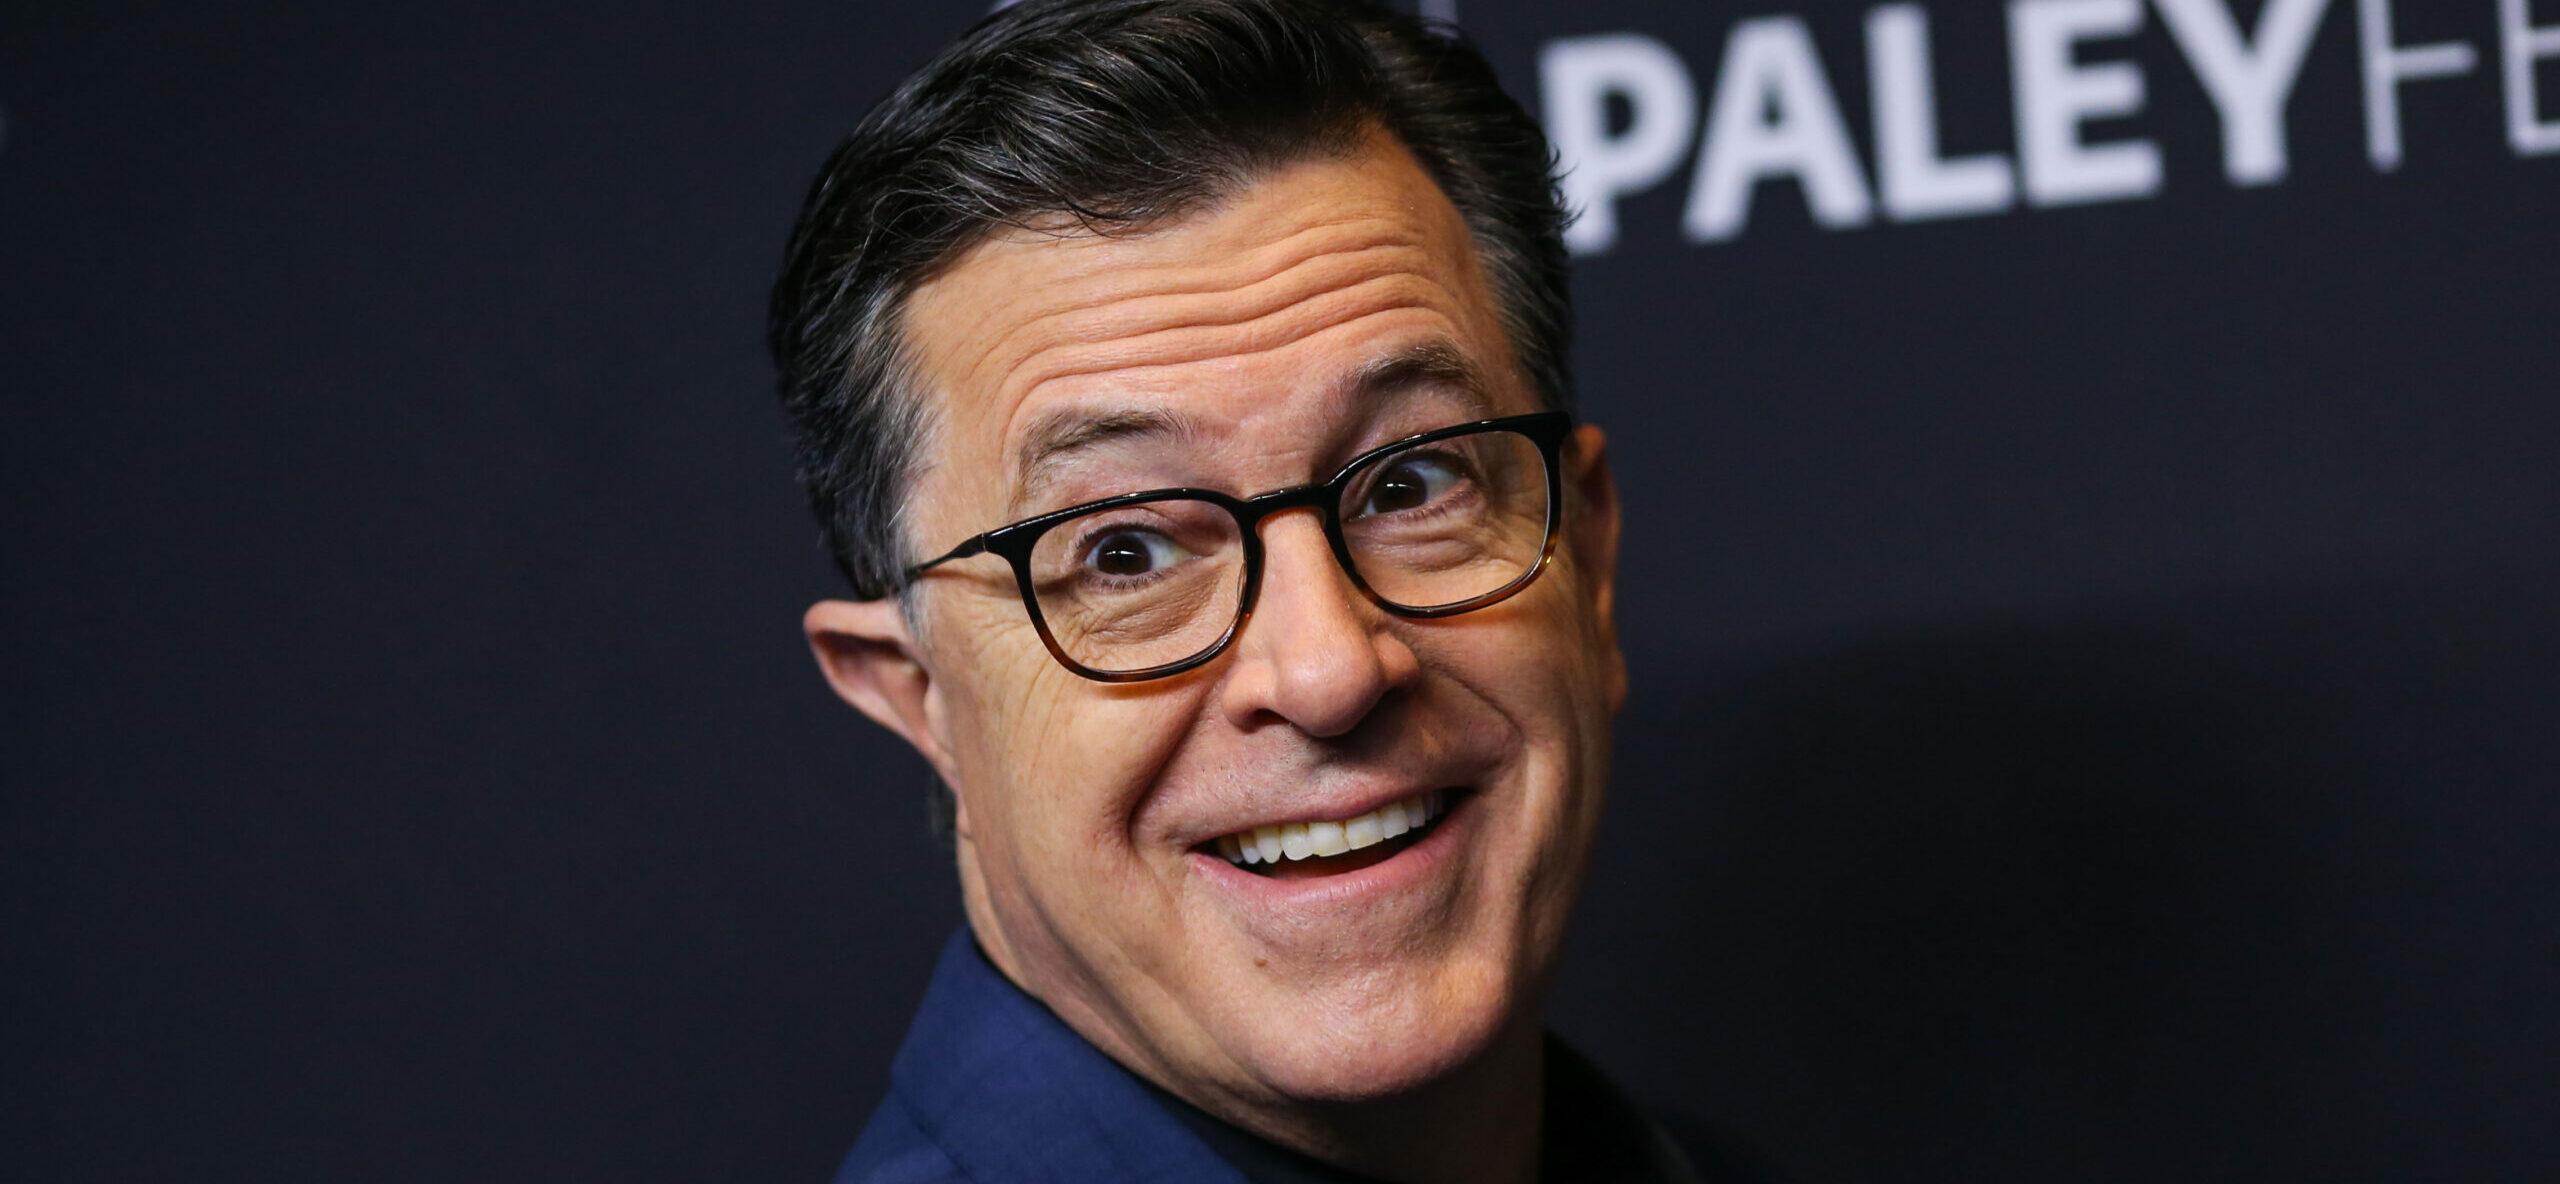 Host of the late show stephen colbert